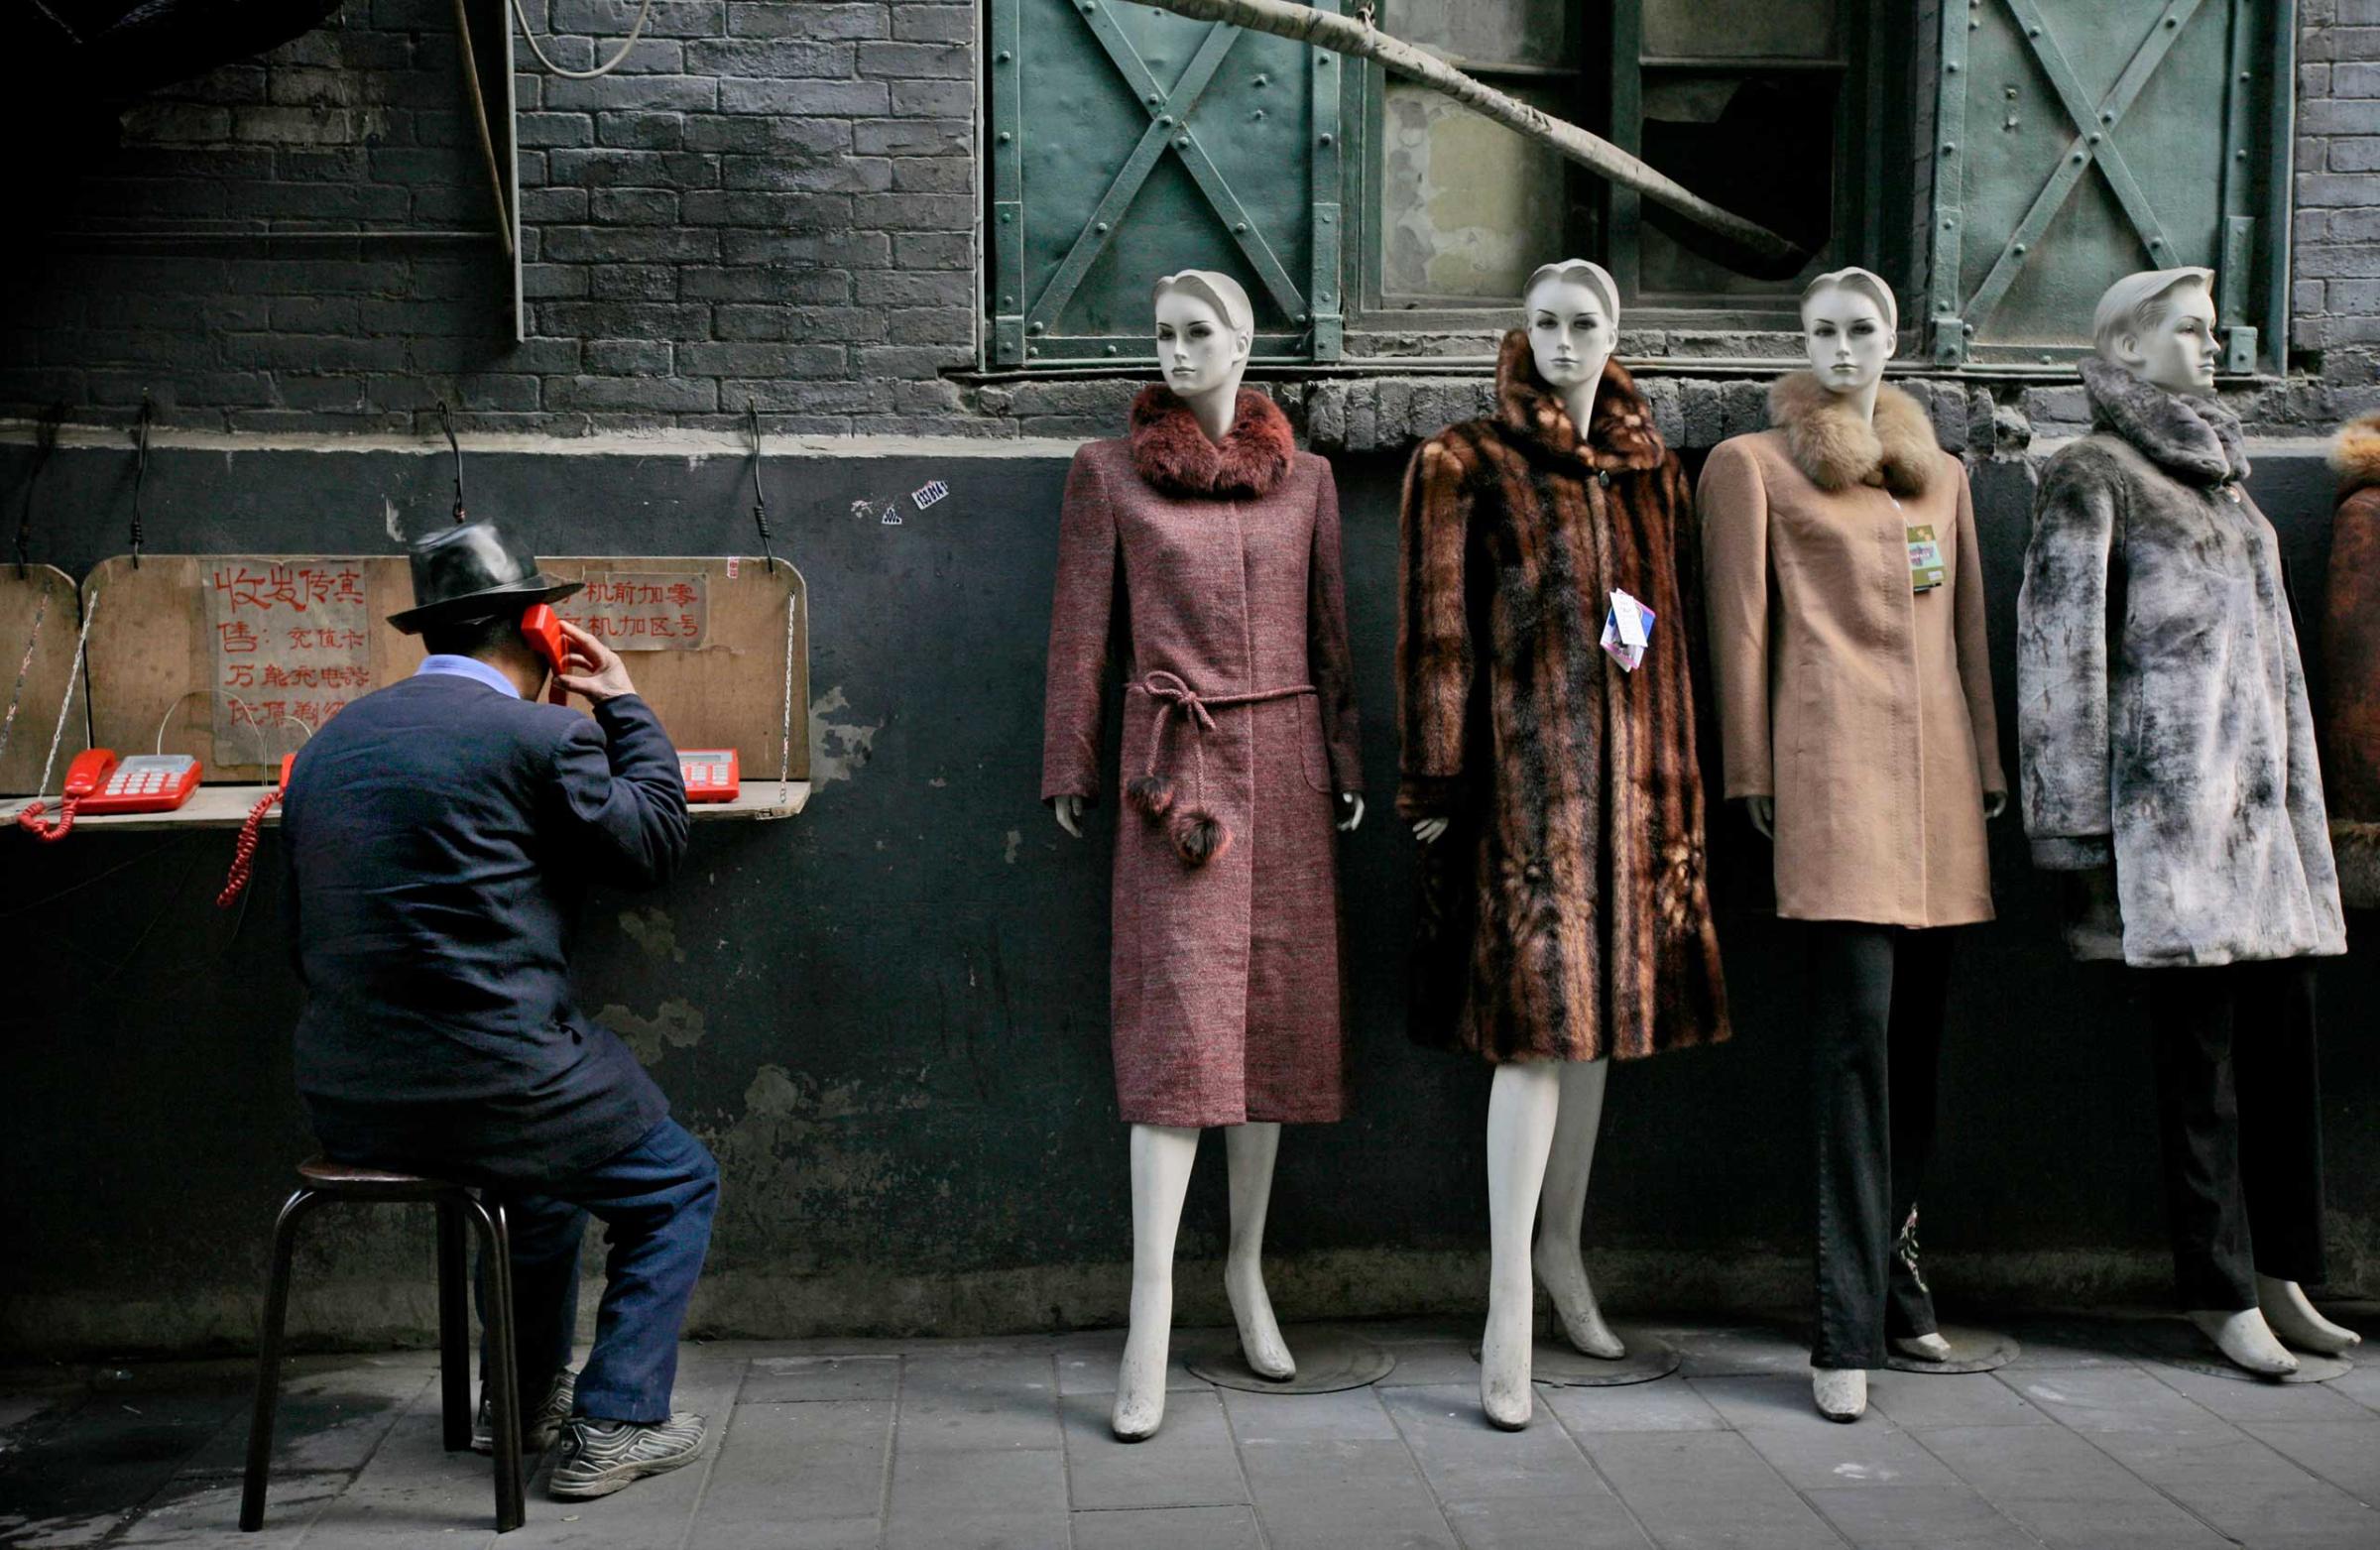 A man speaks on a pay phone next to a clothing shop at a market in Beijing, Wednesday, Dec. 26, 2007.